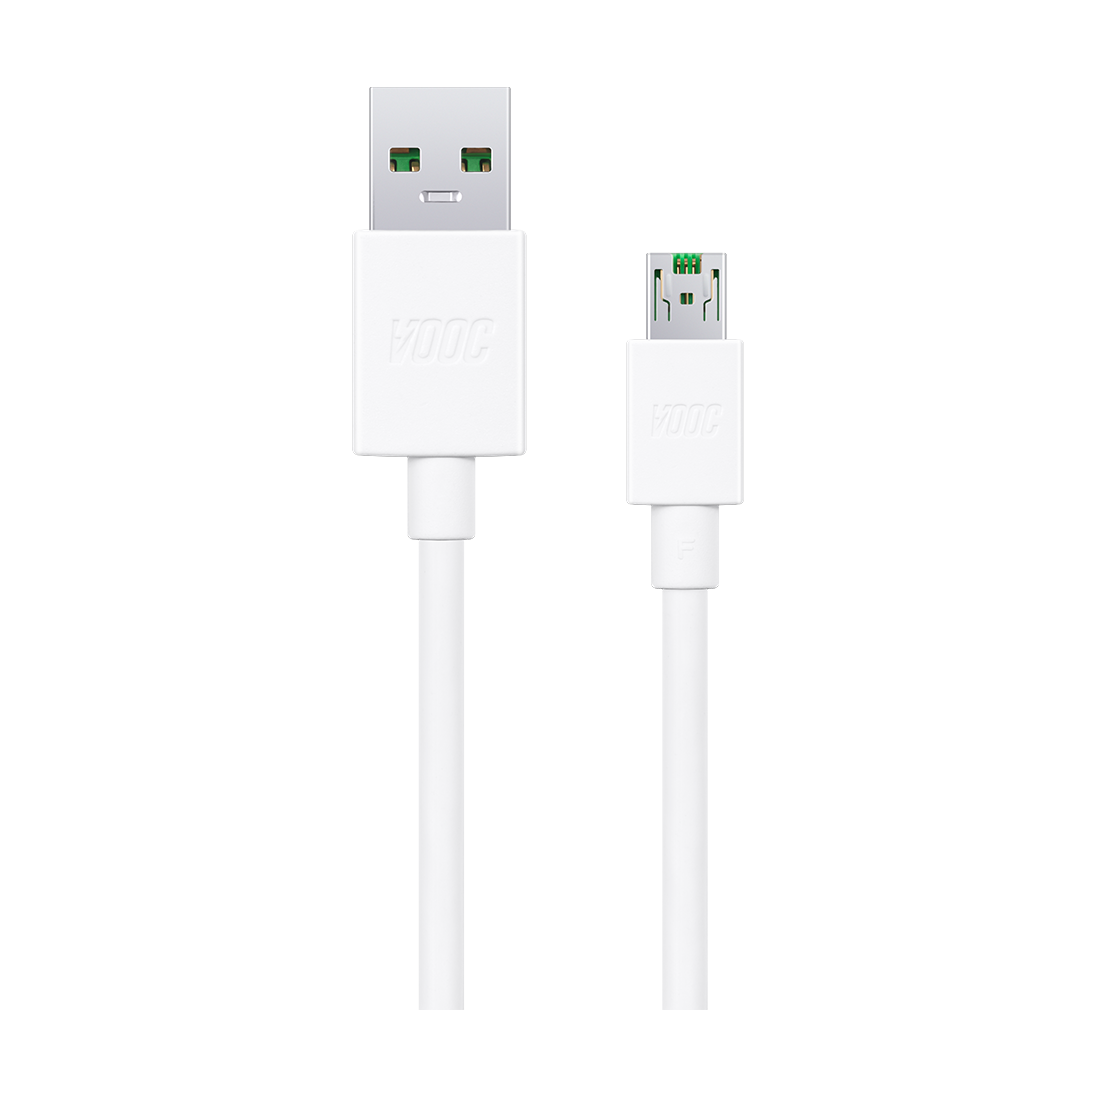 [OEM PACKAGE] OPPO VOOC Micro USB Cable - OPPO Official Store